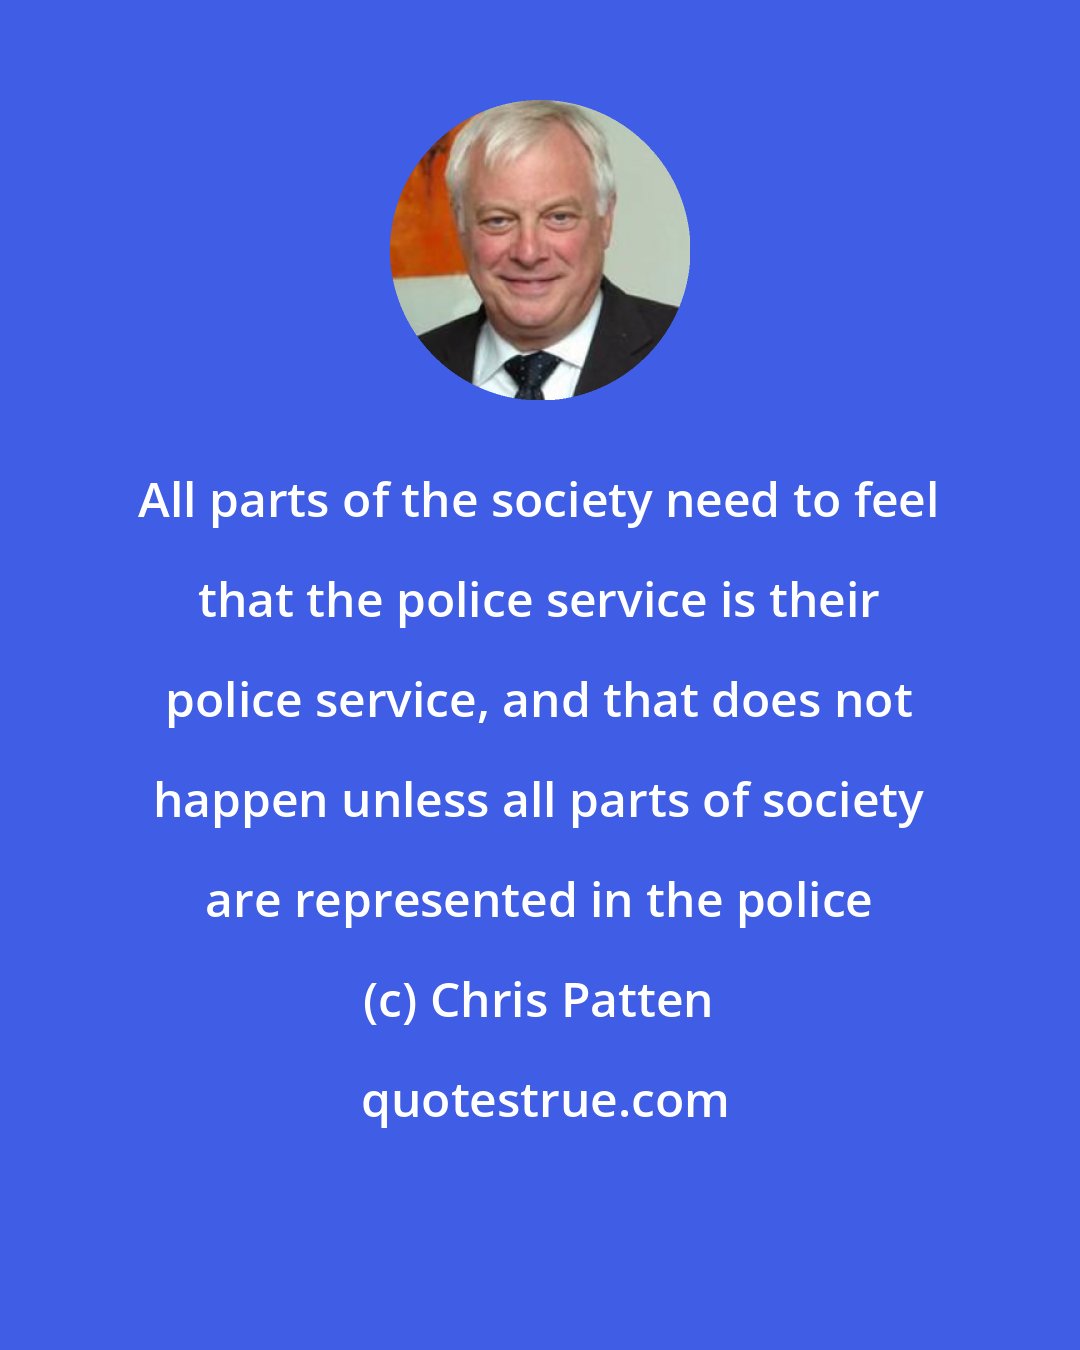 Chris Patten: All parts of the society need to feel that the police service is their police service, and that does not happen unless all parts of society are represented in the police